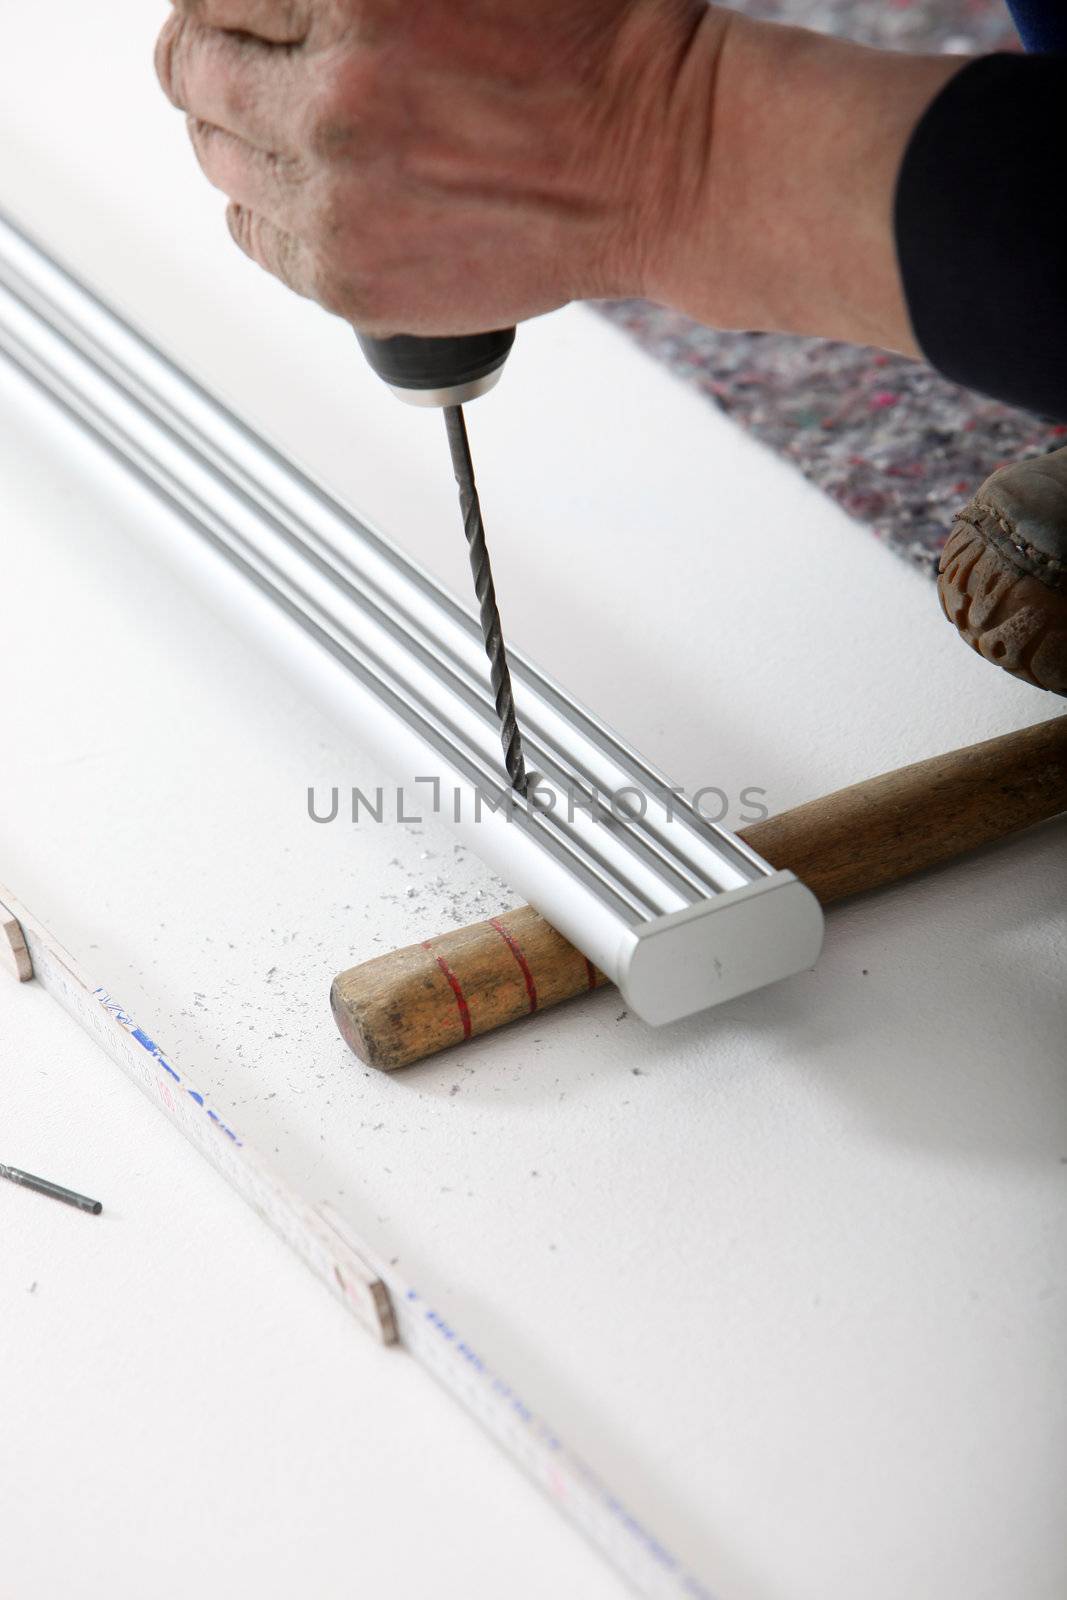 An artisan's hand using a portable cordless drill to drill a hole in a length of aluminium track supported at ground level.